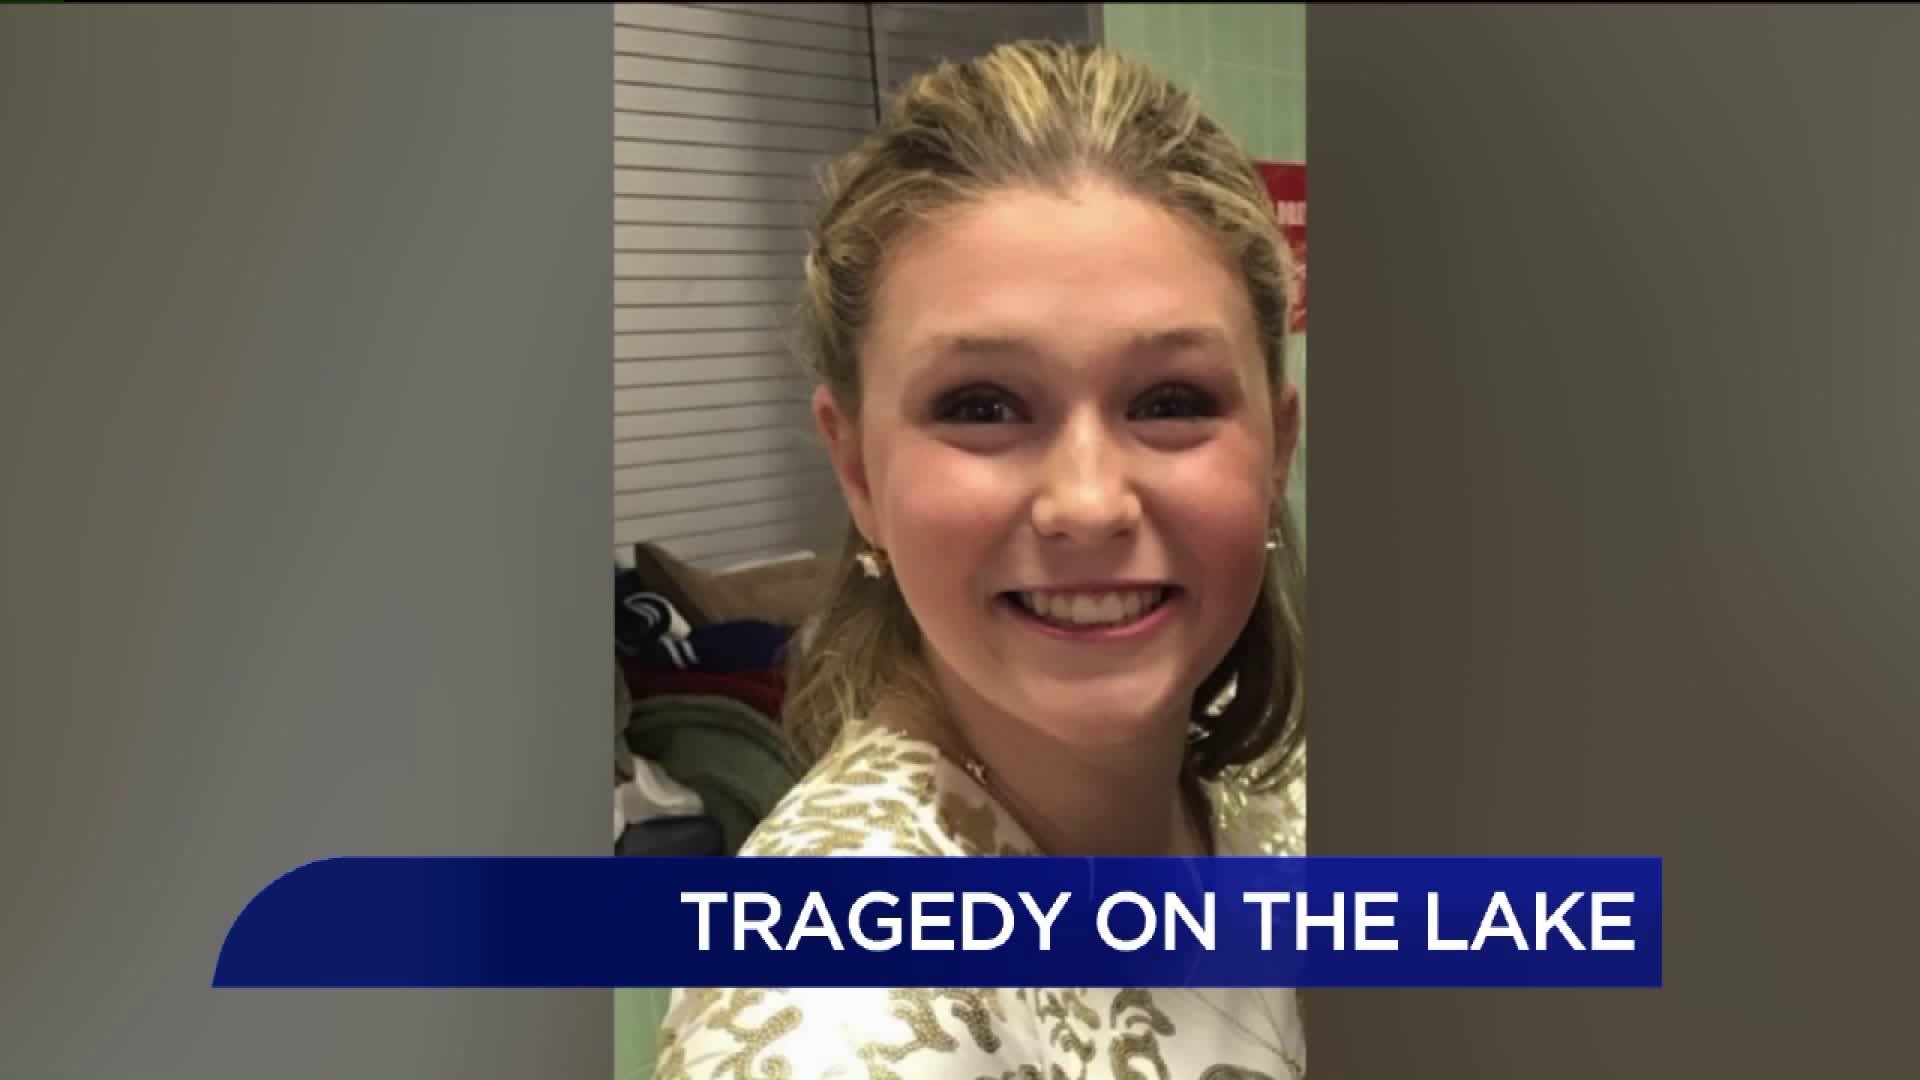 Tragedy on the Lake: Remembering Leah Loomis